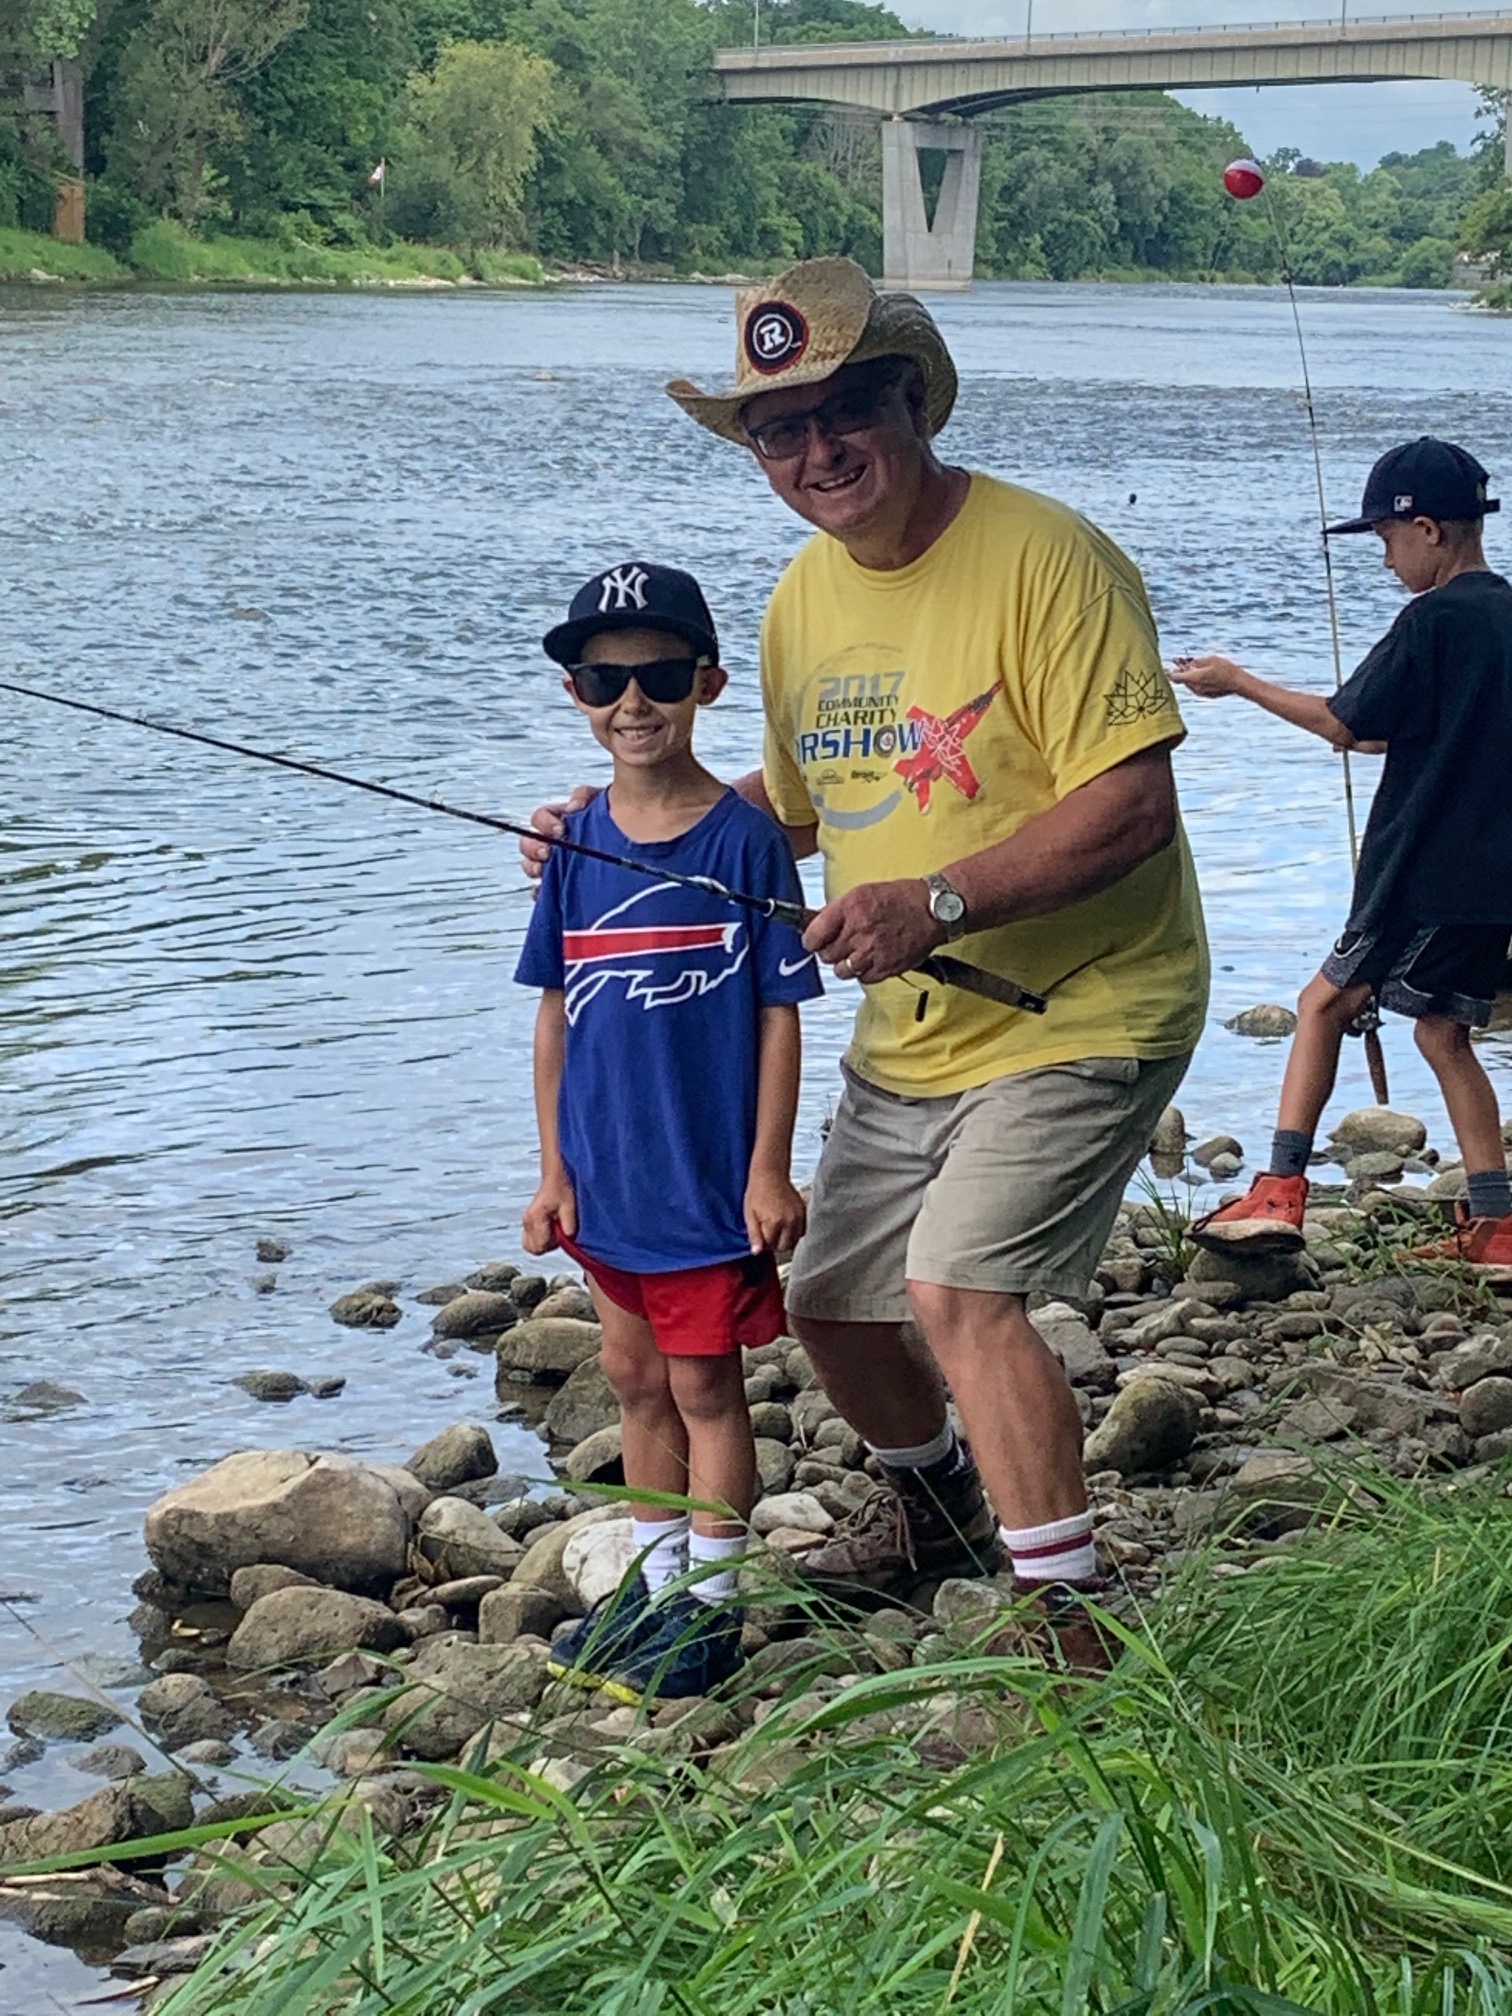 Wayne Fyffe fishing with child on Grand River